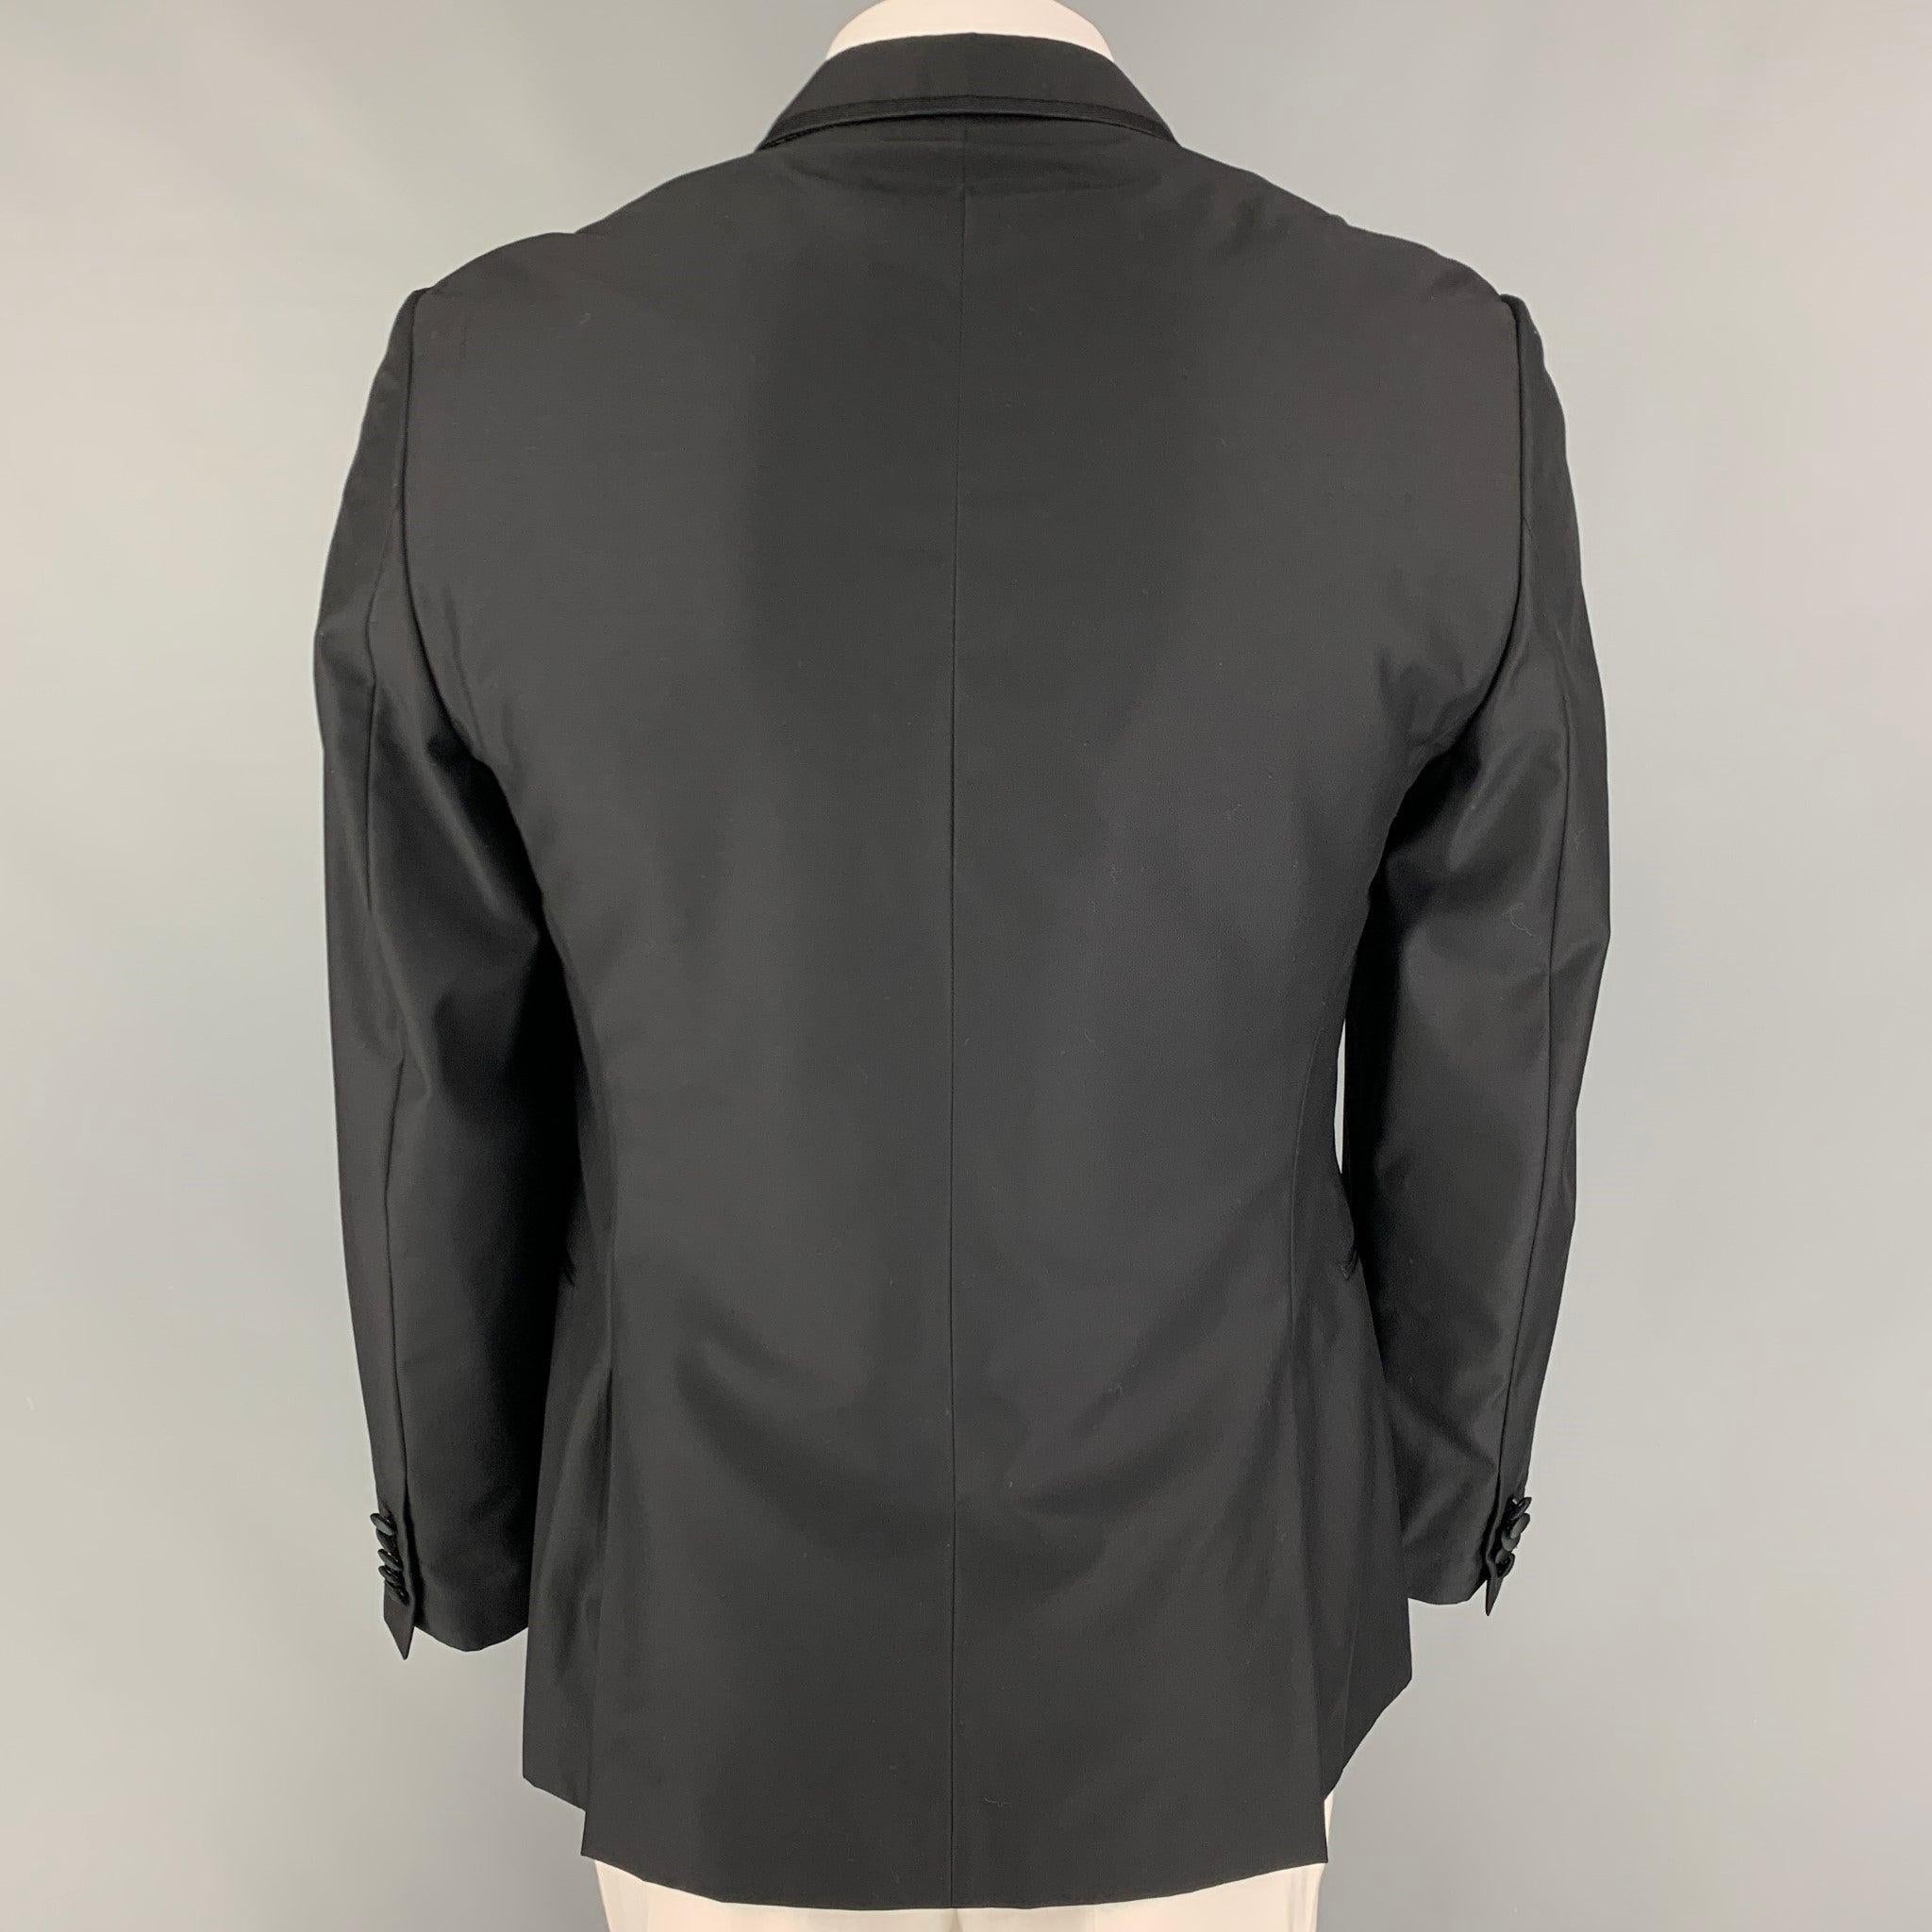 PAUL SMITH Size 42 Black Wool Peak Lapel Sport Coat In Good Condition For Sale In San Francisco, CA